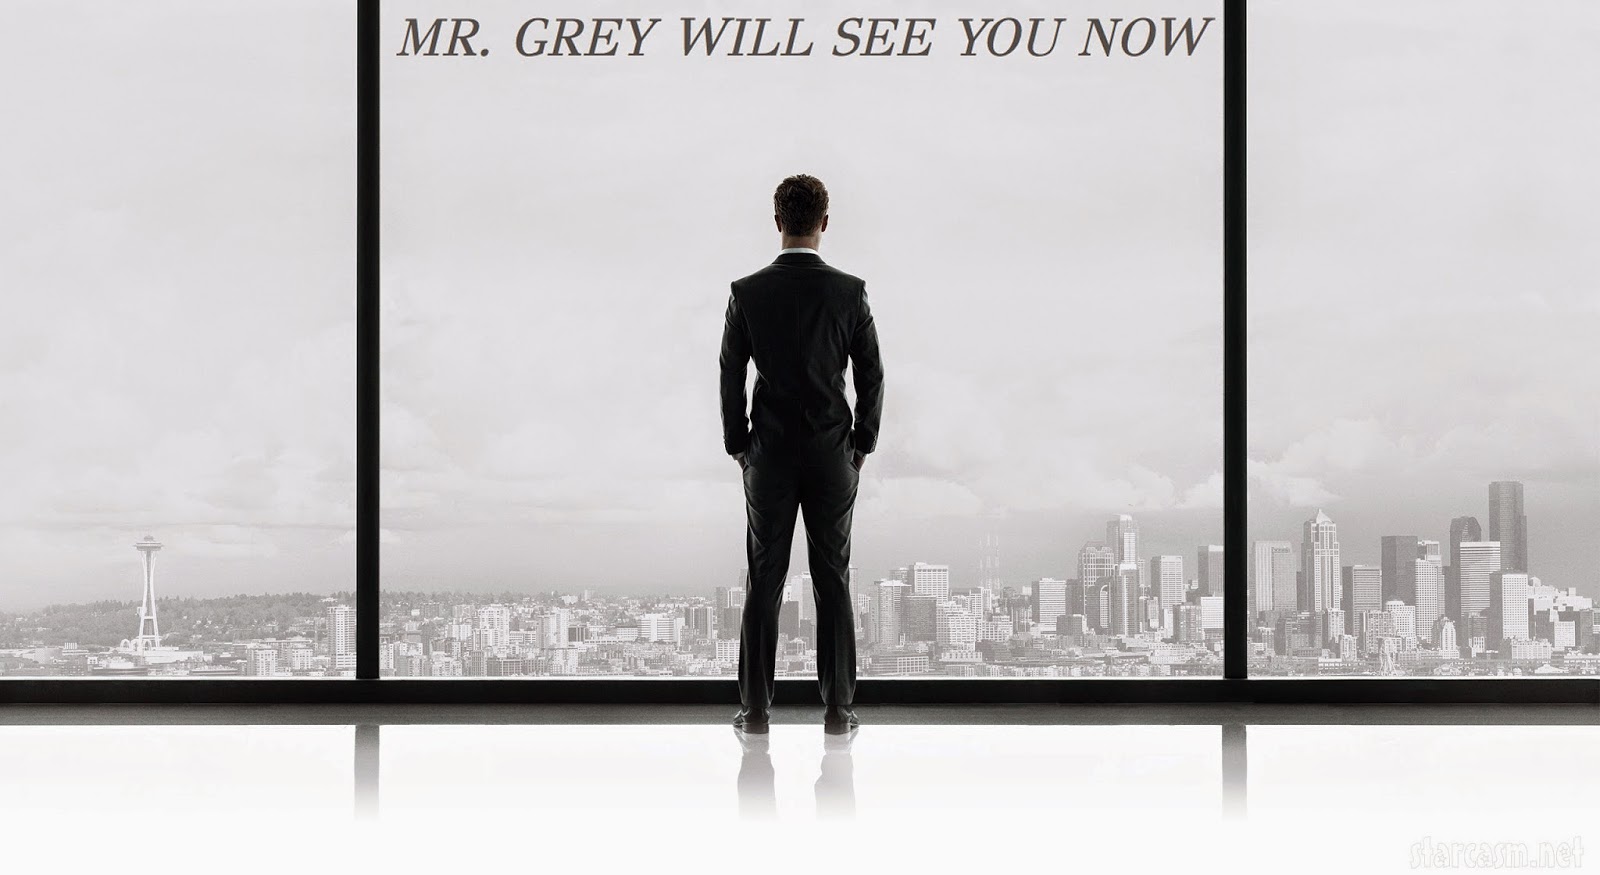 WidowSphere: A Circle of Hope: Mr. Grey Will See You Now